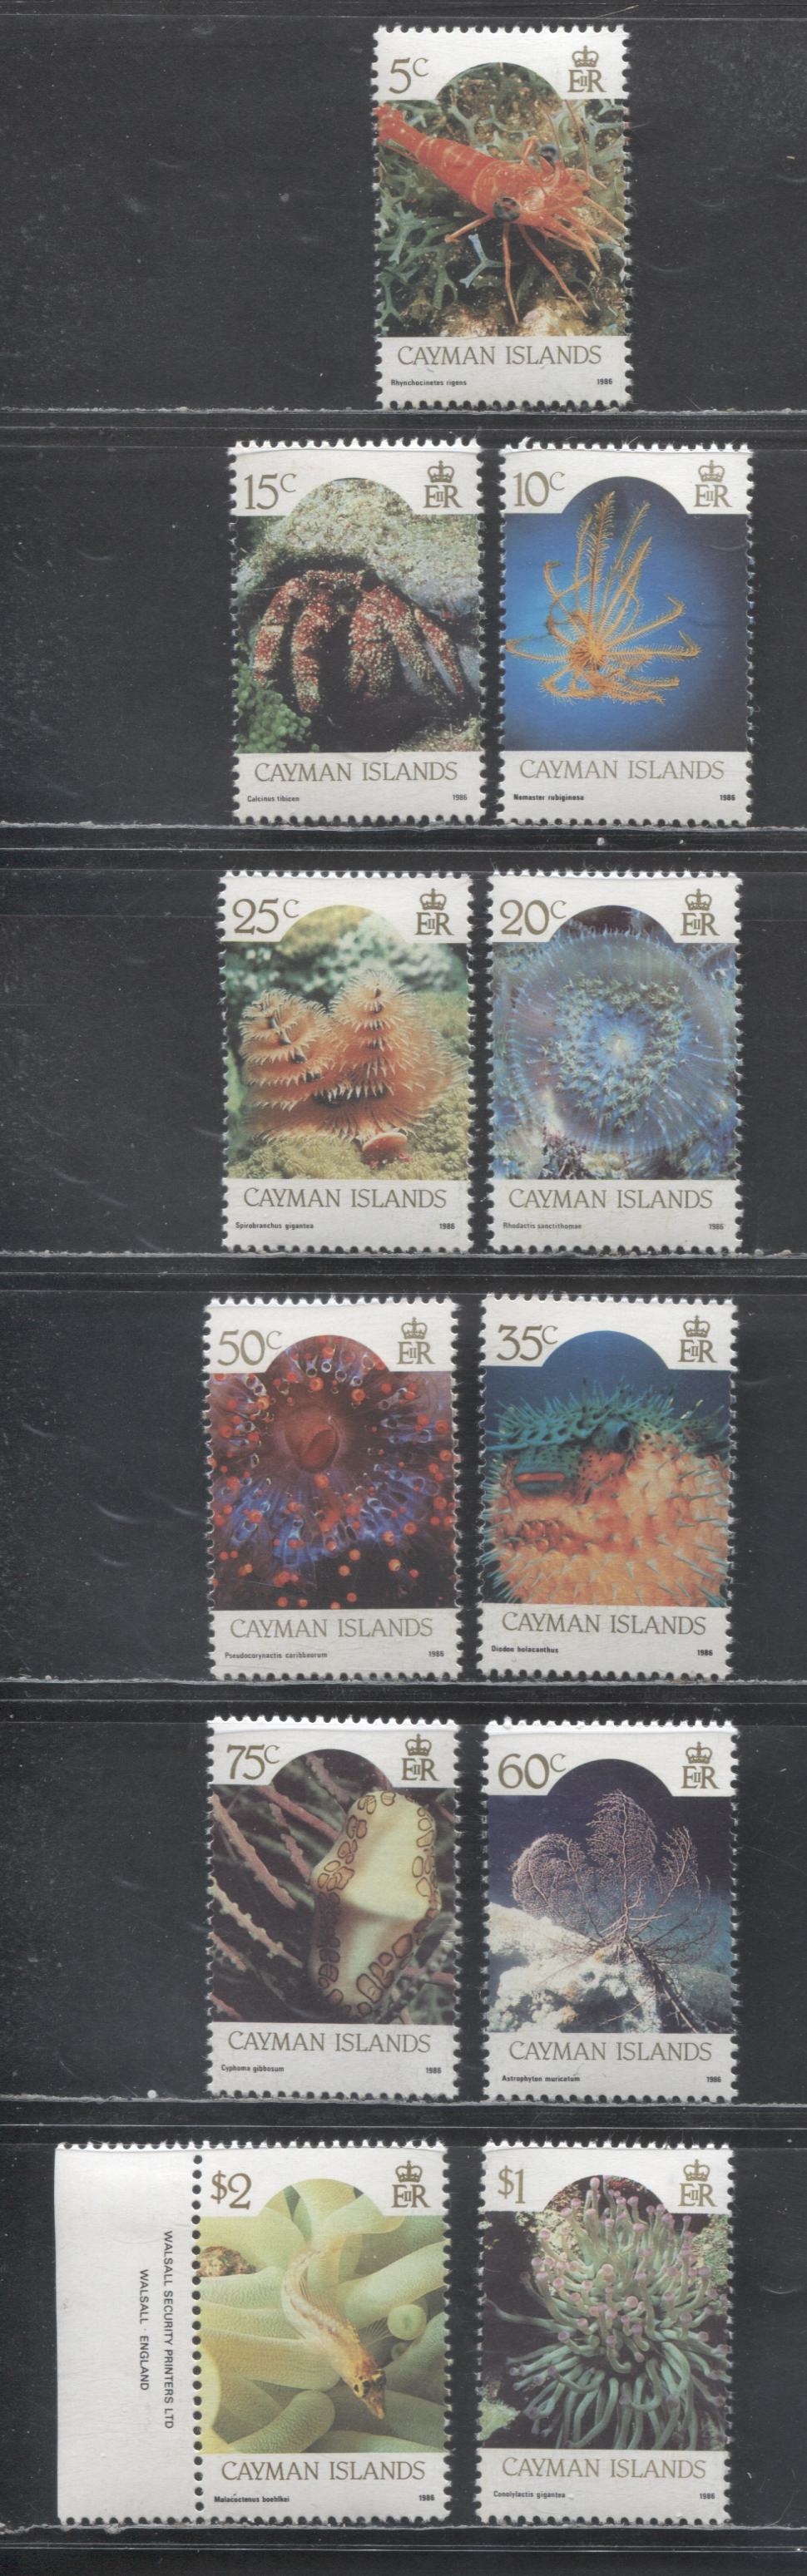 Lot 148 Cayman Islands SC#562-572 1986 Marine Life Definitives, 11 VFOG & NH Singles, Click on Listing to See ALL Pictures, Estimated Value $15